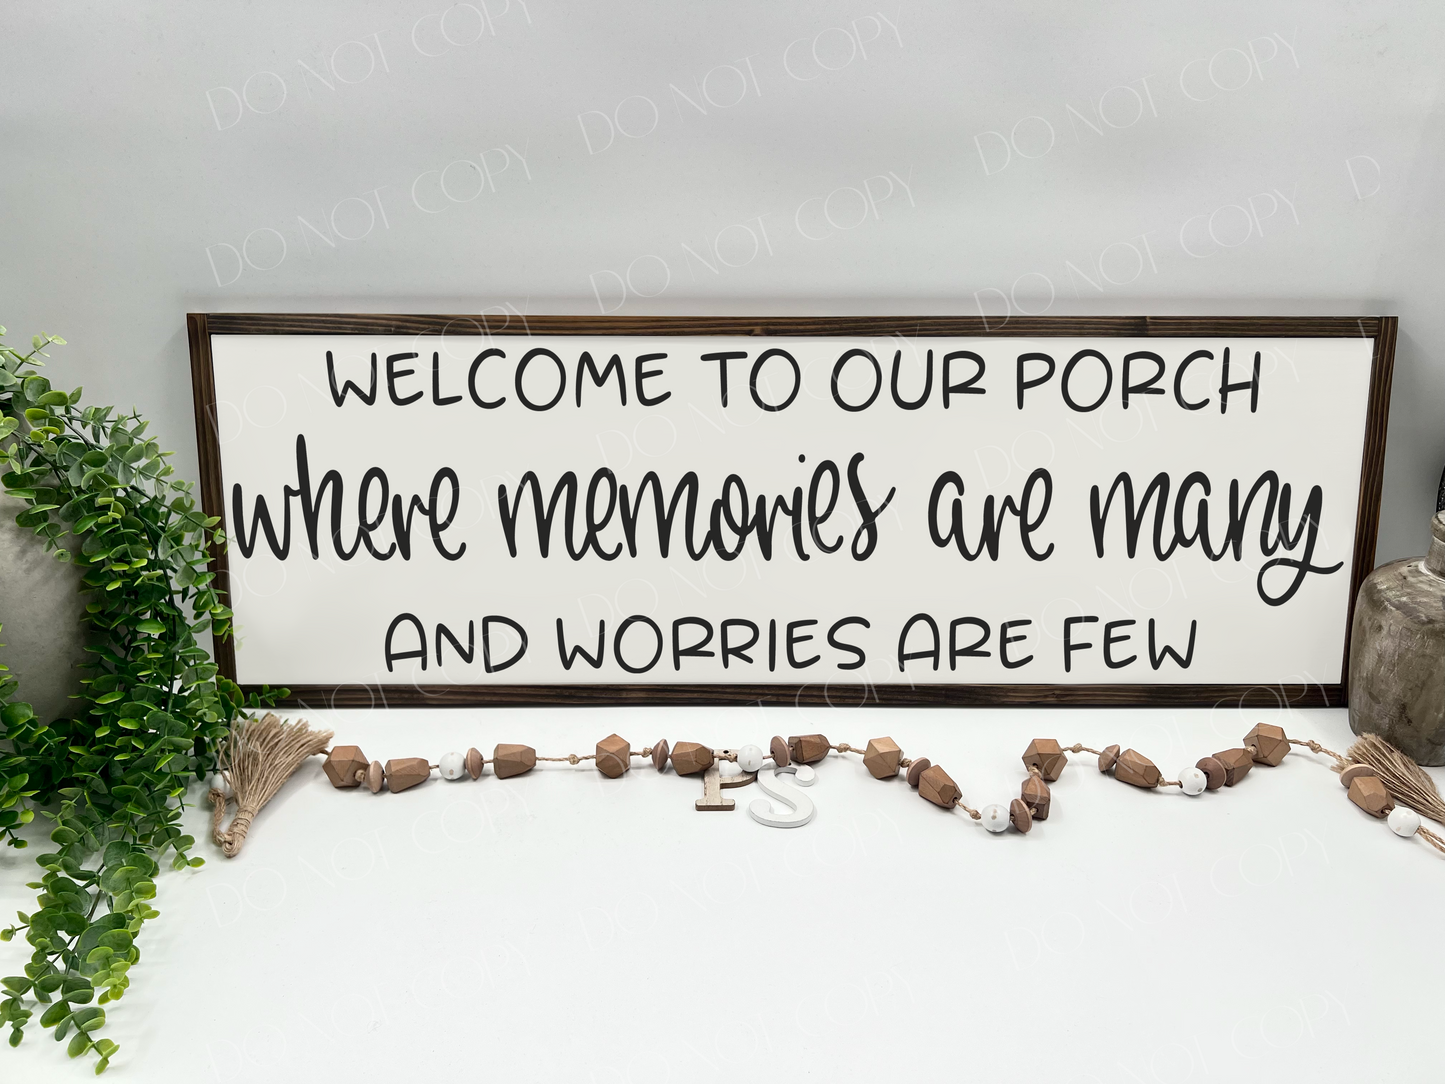 Welcome To Our Porch Where Memories Are Many And Worries Are Few - White/Thick/E. Black - Wood Sign